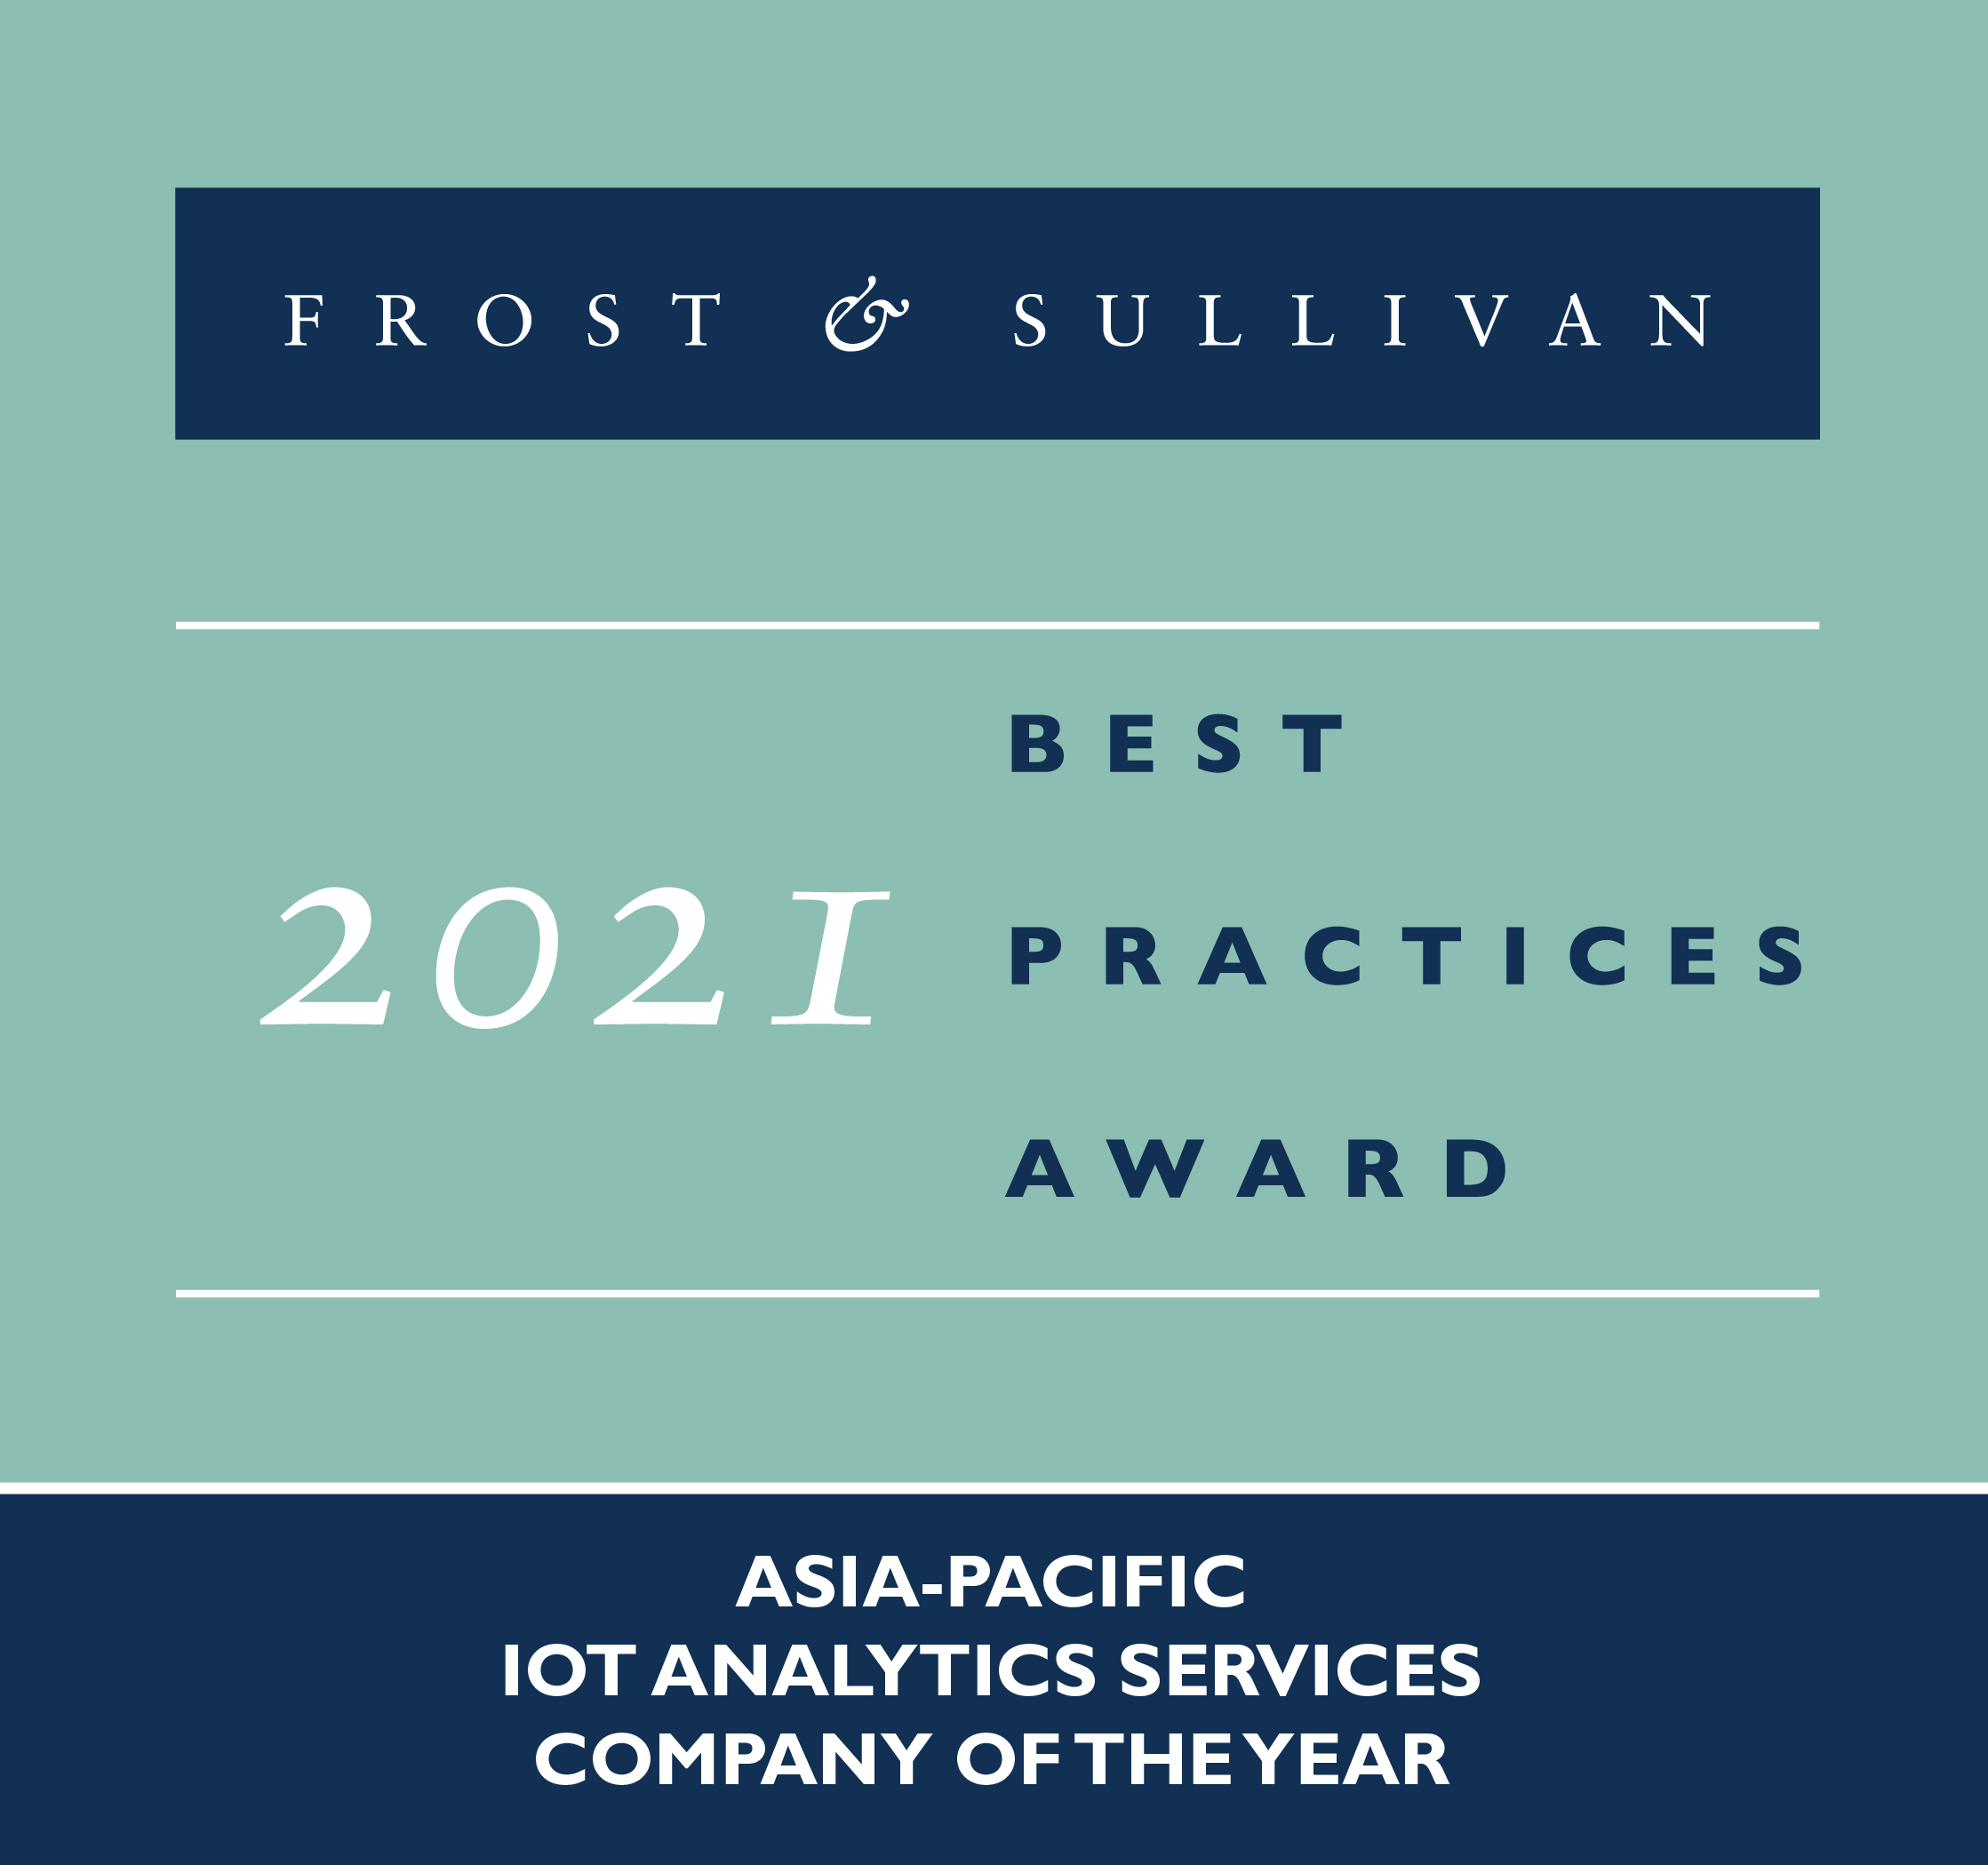 Asia Pacific IoT Service Provider of the Year